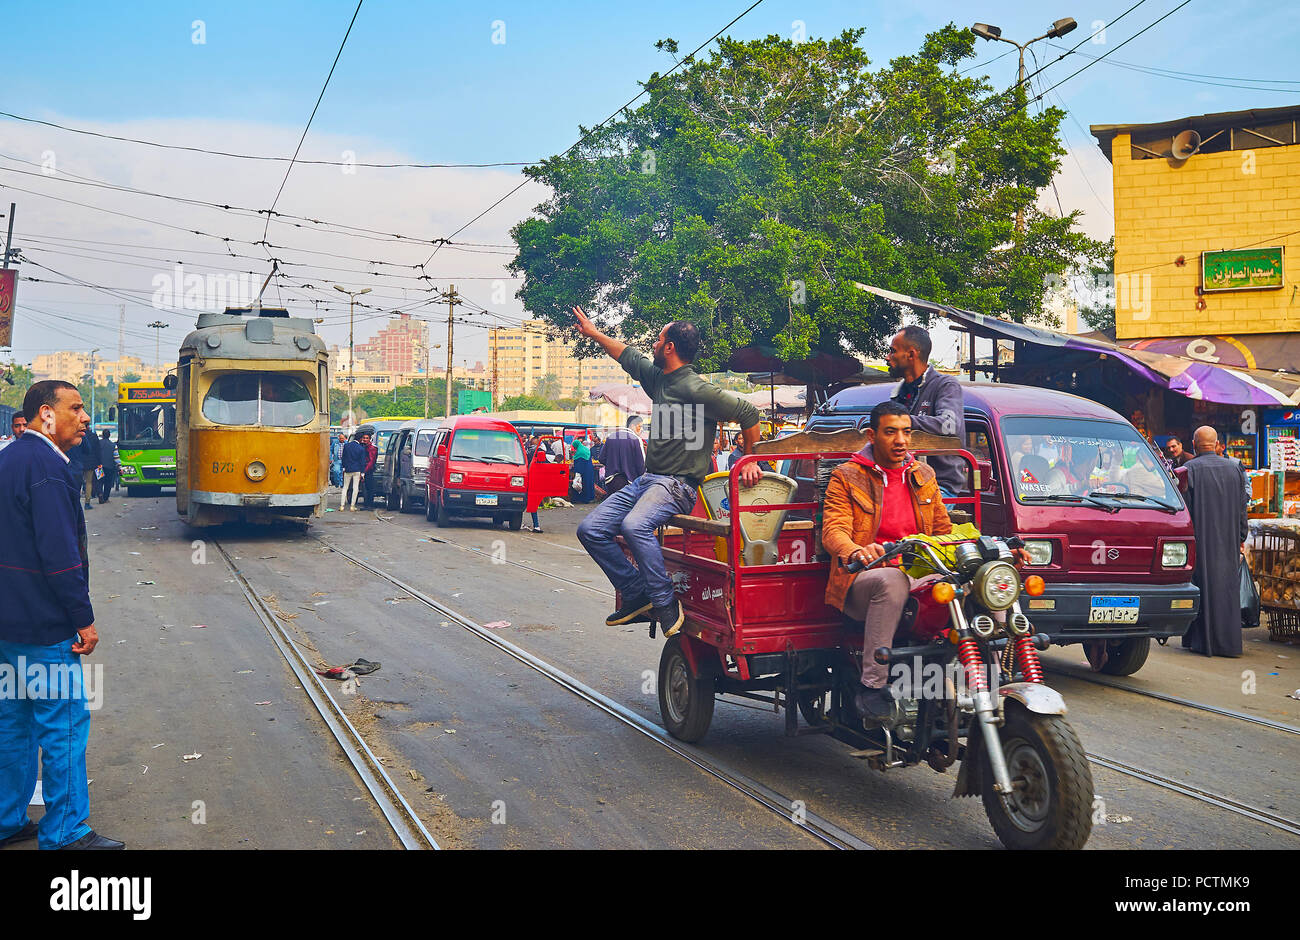 ALEXANDRIA, EGYPT - DECEMBER 18, 2017: The market vendors ride on motorcycle cargo trailer along the tramway in Sharif Avenue with vintage tram on the Stock Photo